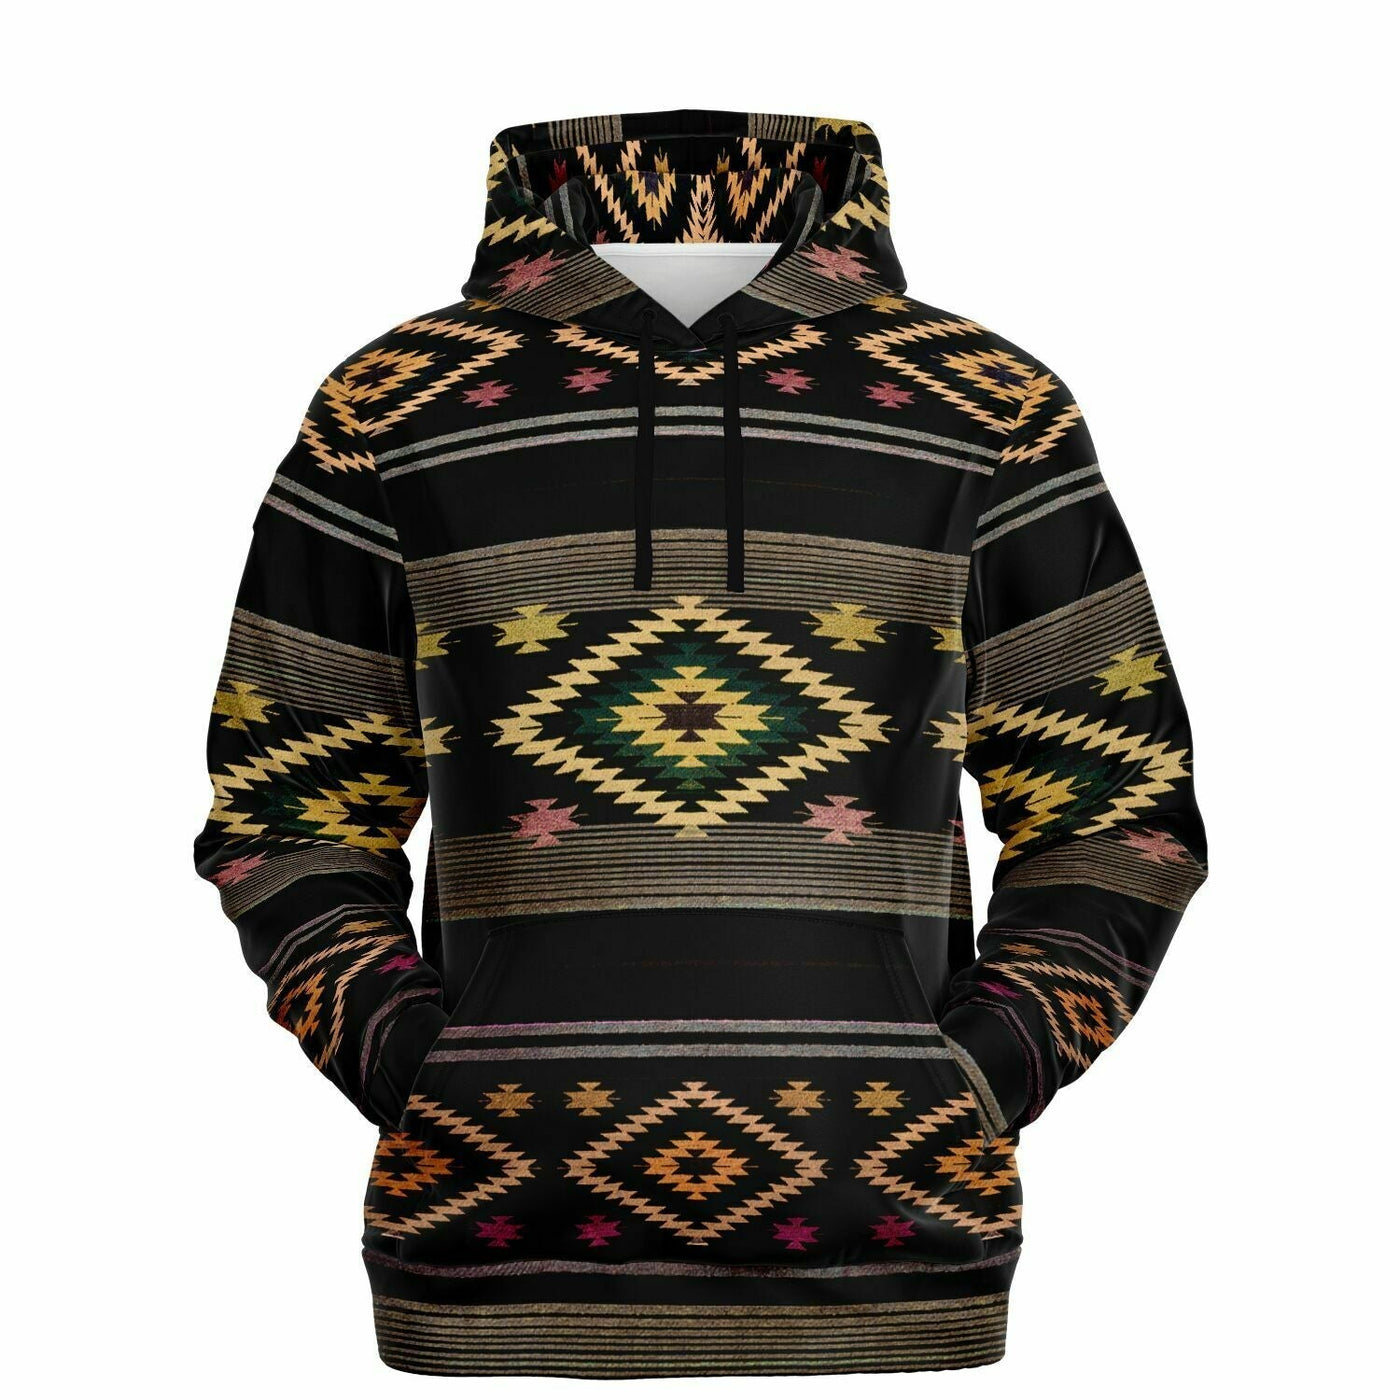 Native American Hoodie with Black Gold Shamanic Tribal Pattern